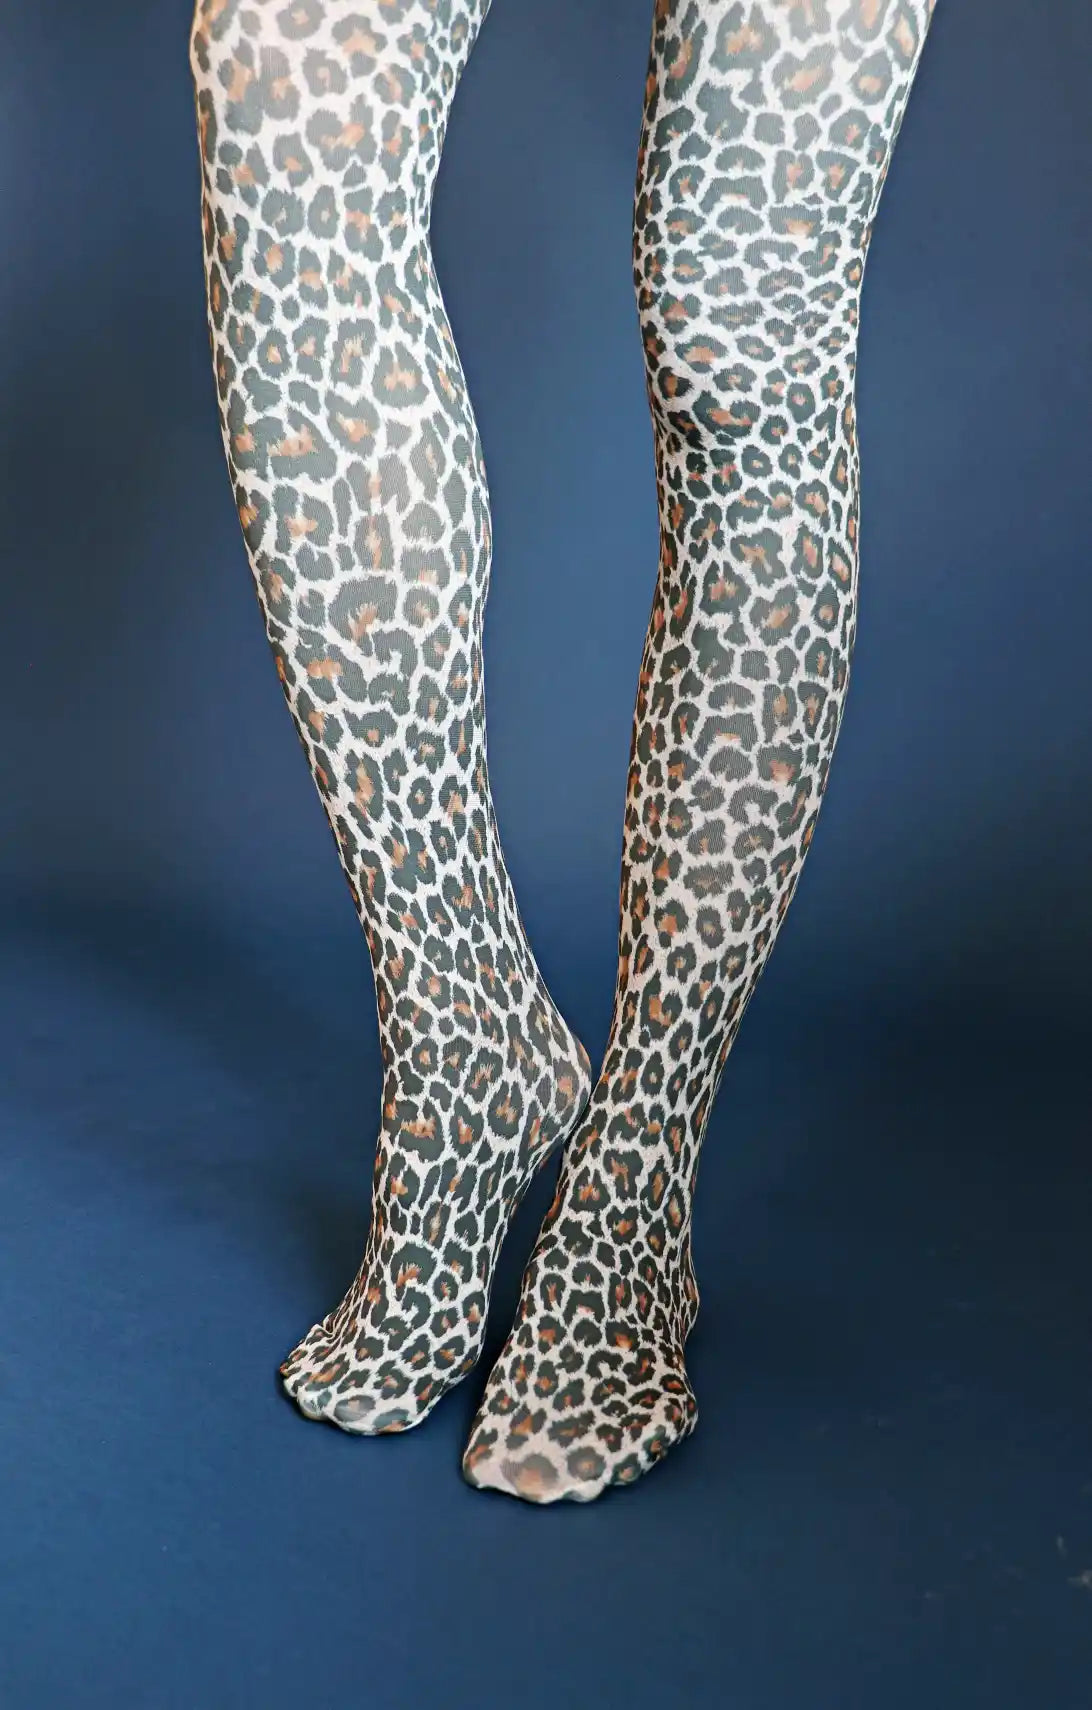 Petite Leopard Tights Fashion Cheetah Print Pantyhose for All